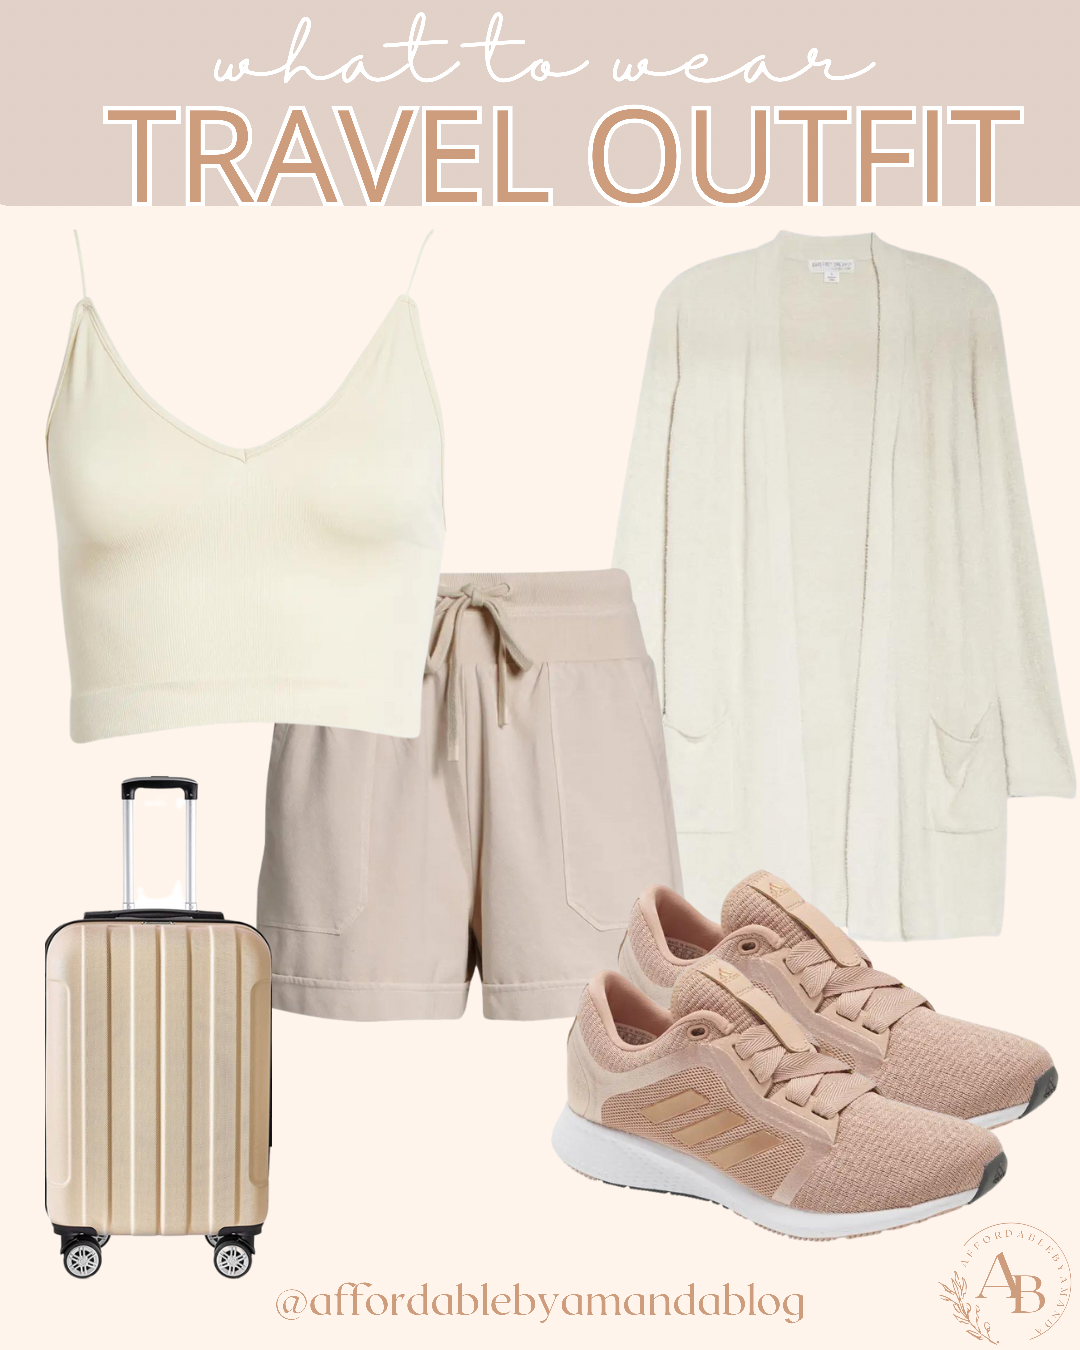 Summer Travel Outfit Ideas - Affordable by Amanda